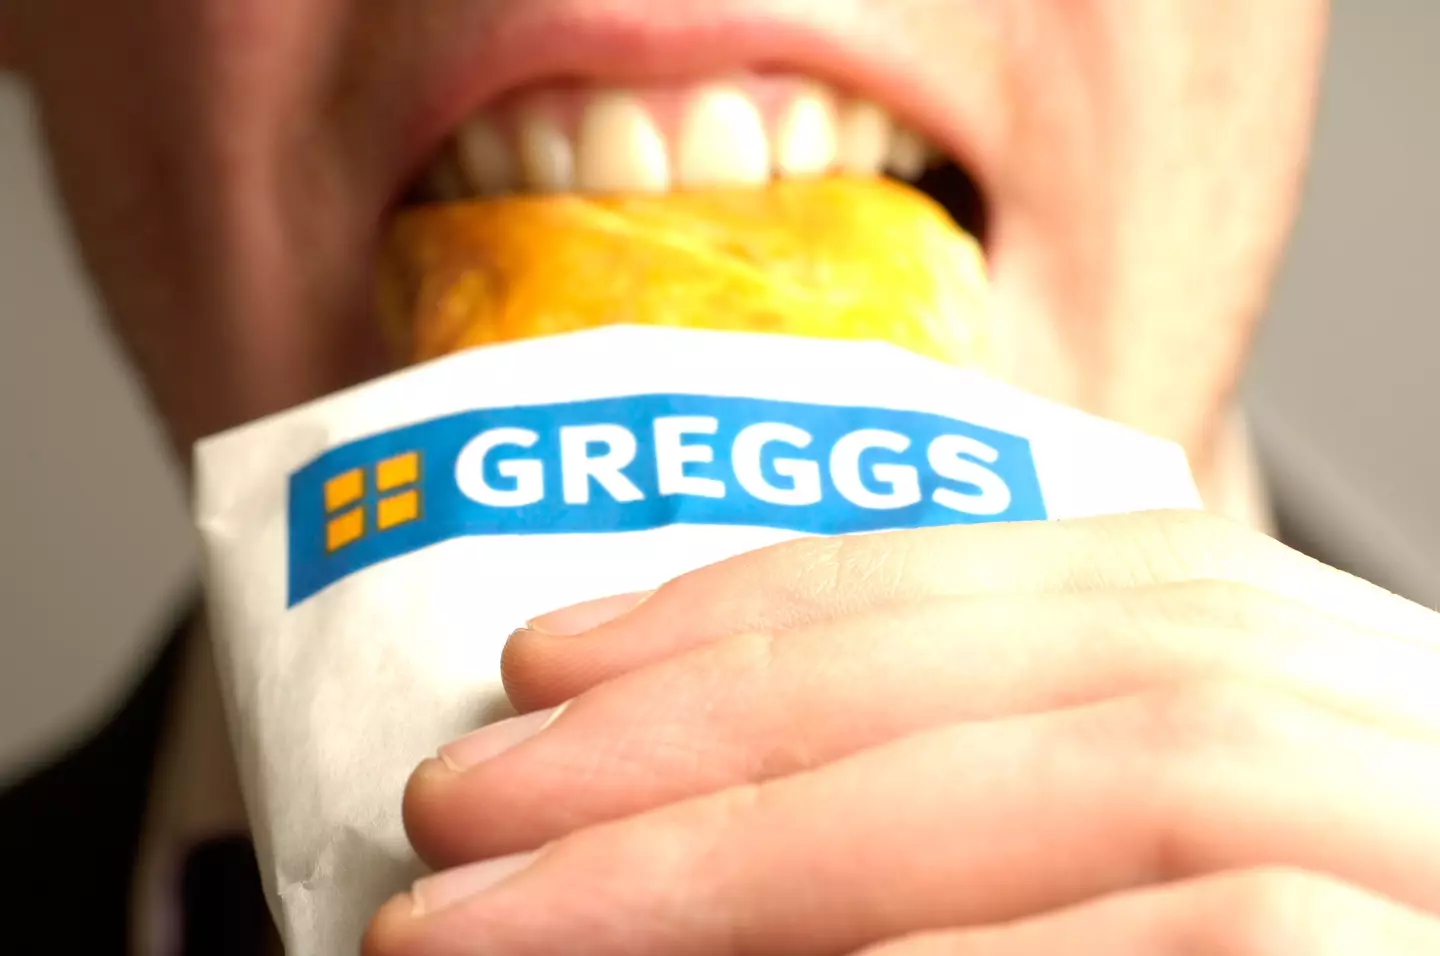 Greggs customers in London will be able to pick up a late night snack.